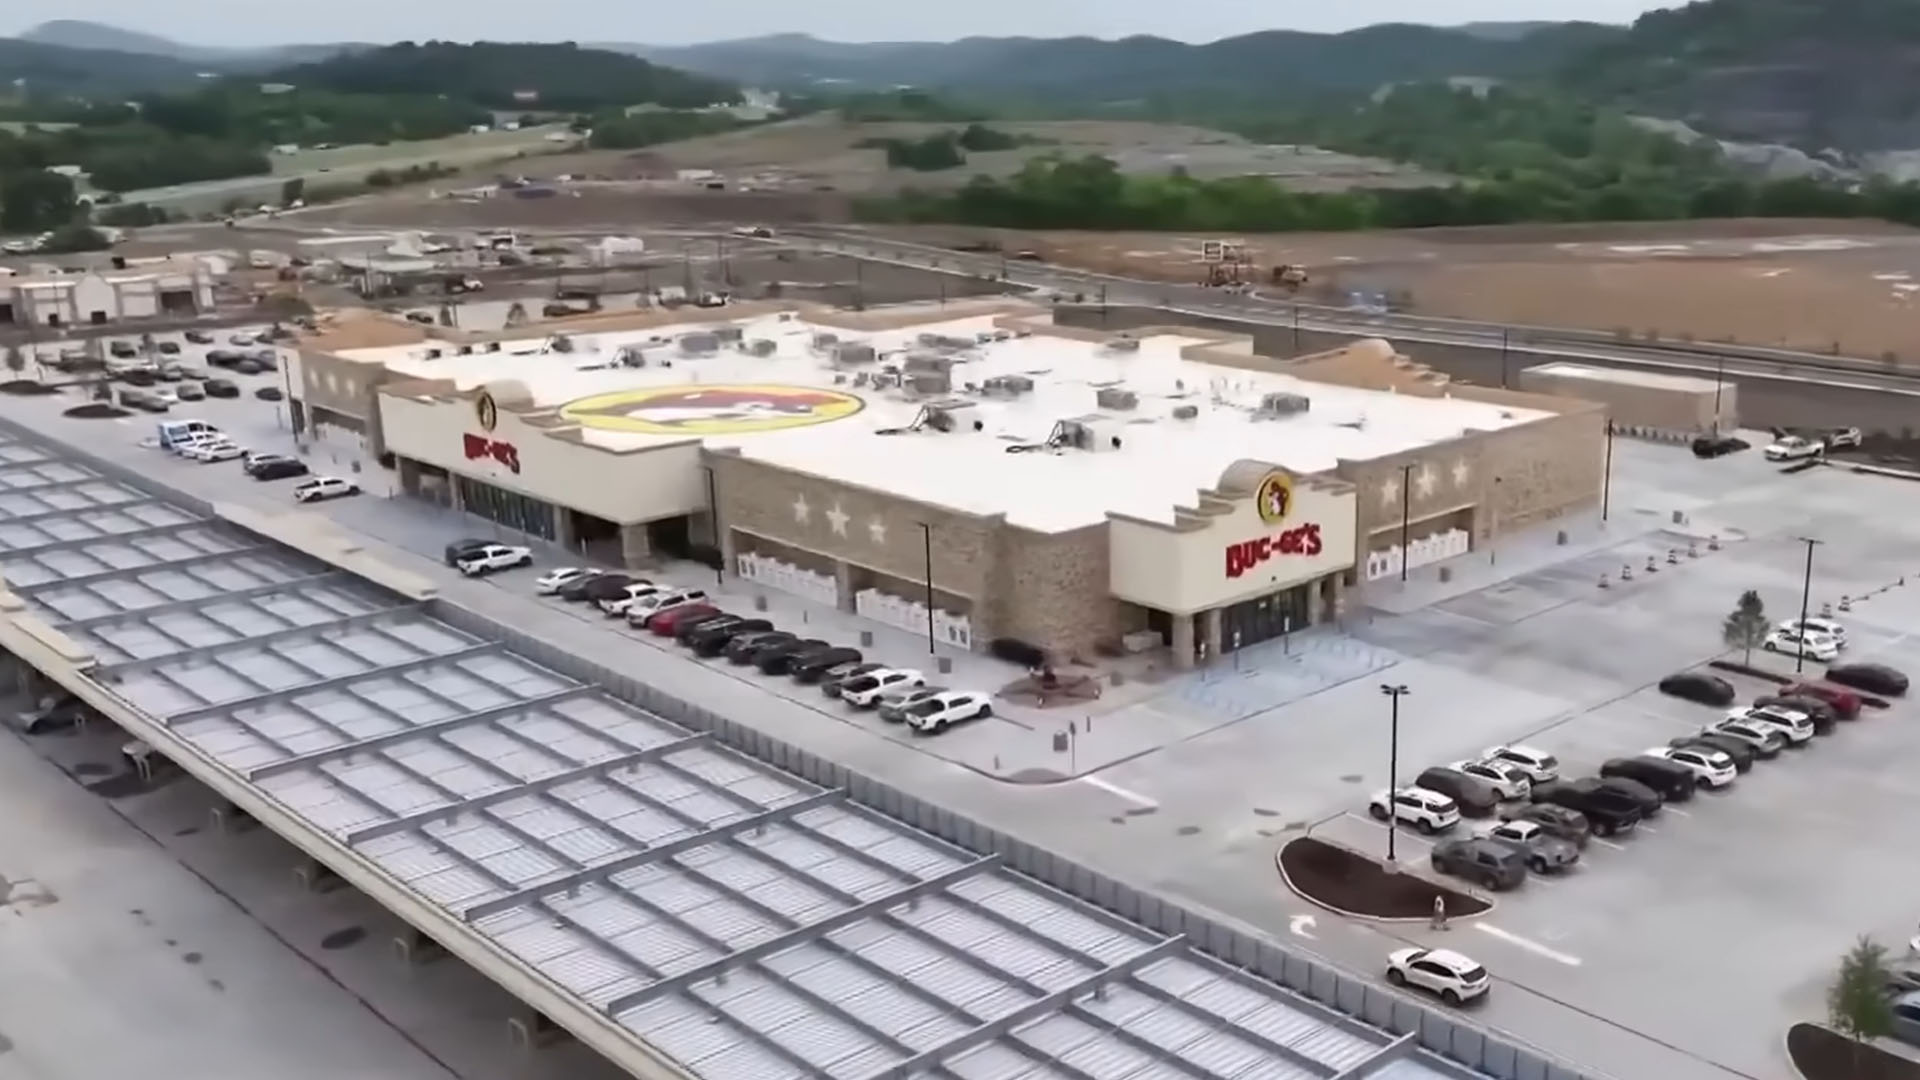 World’s Largest Gas Station Is a New Buc-ee’s With 120 Pumps